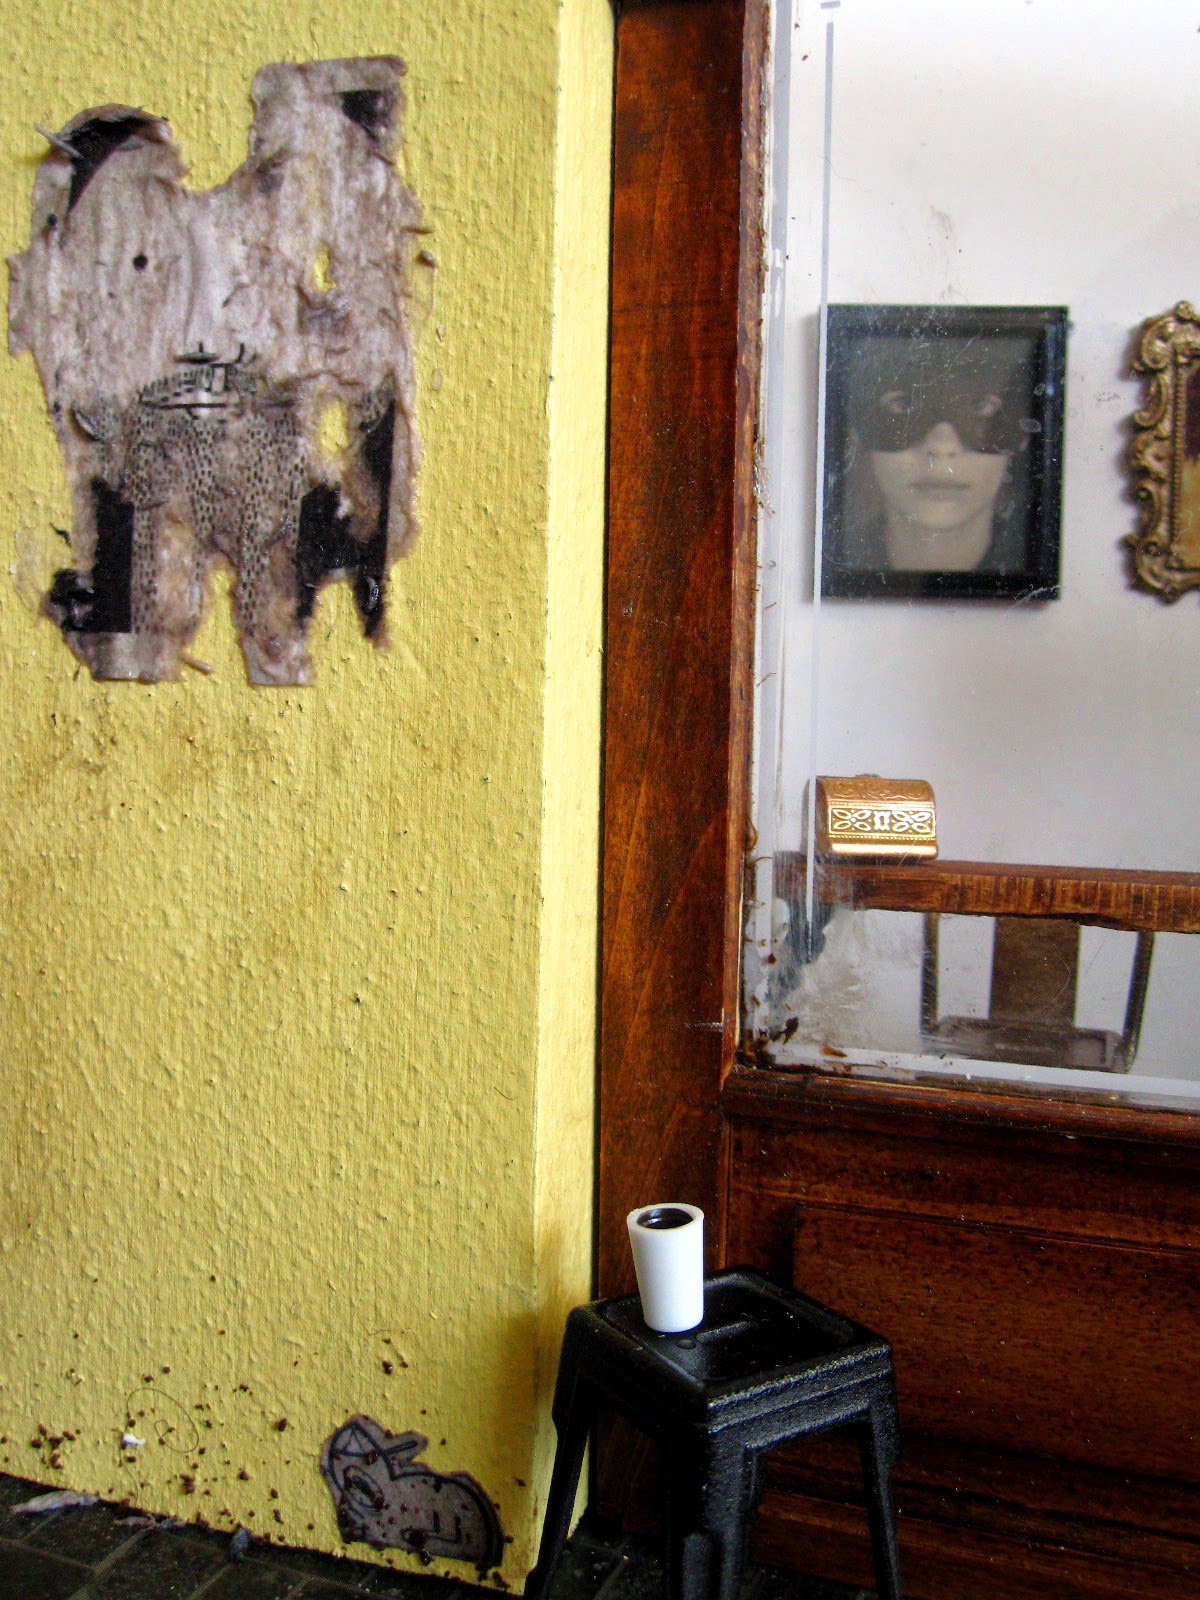 Exterior of a modern dolls' house miniature cafe with paste-ups on the wall.